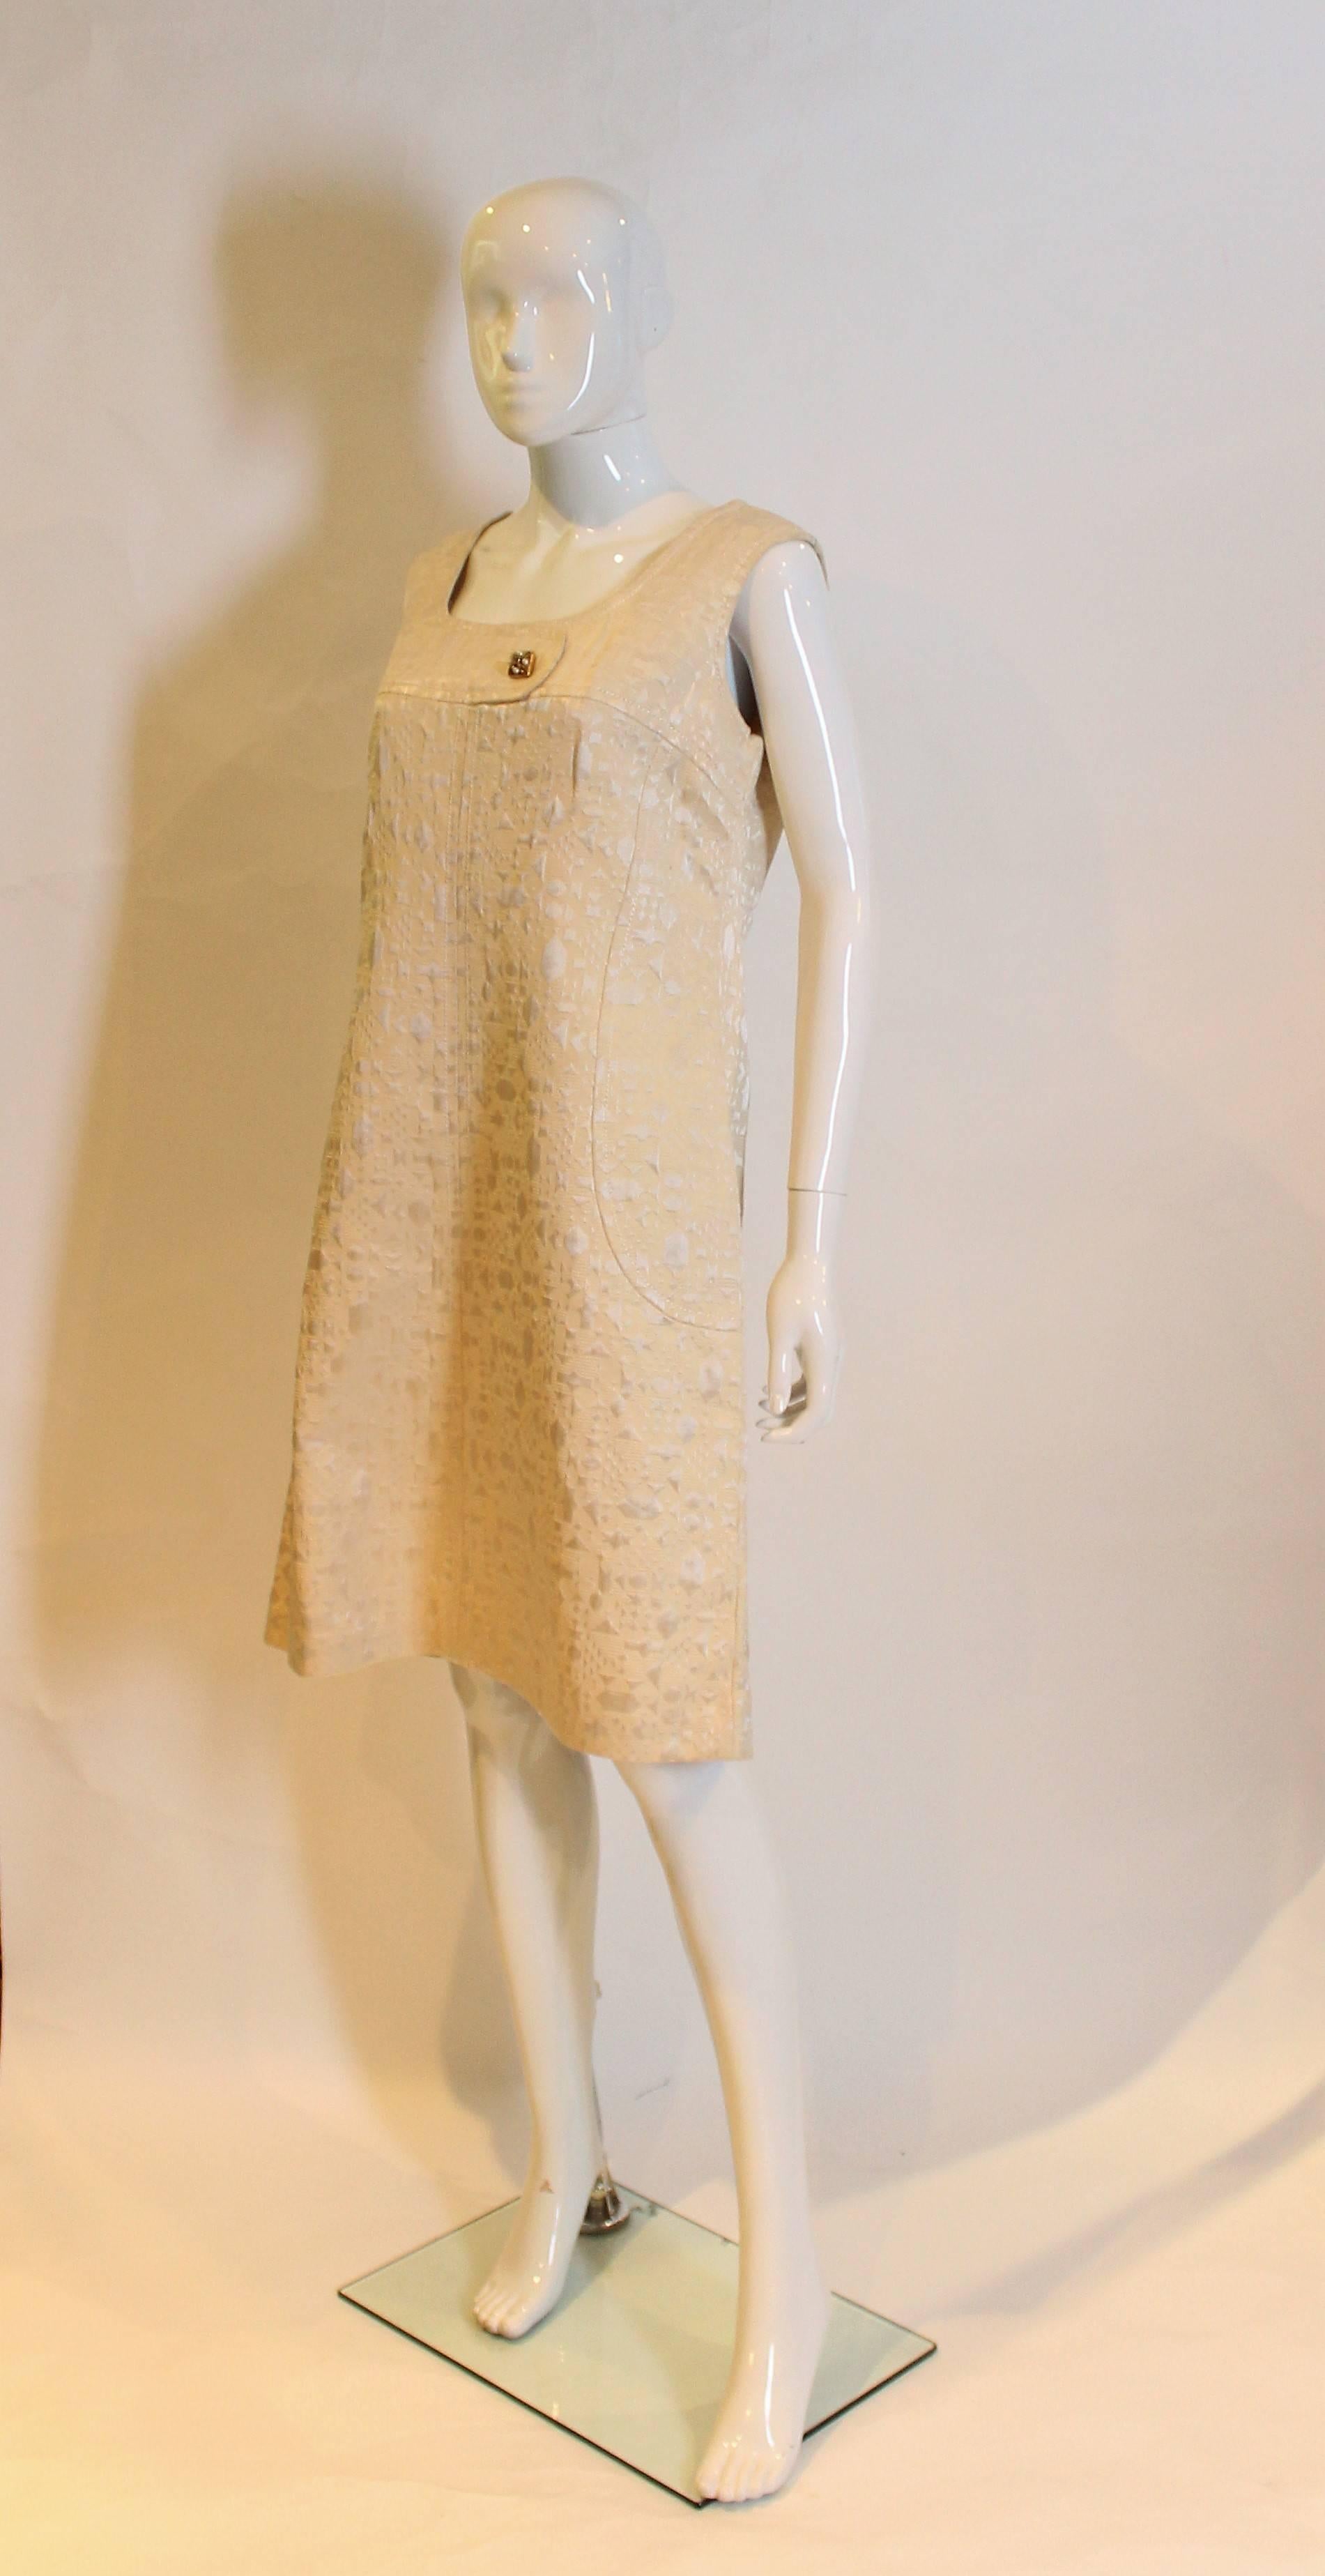 A chic shift dress from the 1960, ideal for a city wedding. The dress is made of a gold broacde like fabric with a deep square neckine and no sleeves. It has a zip opening at the back and an A lline skirt .